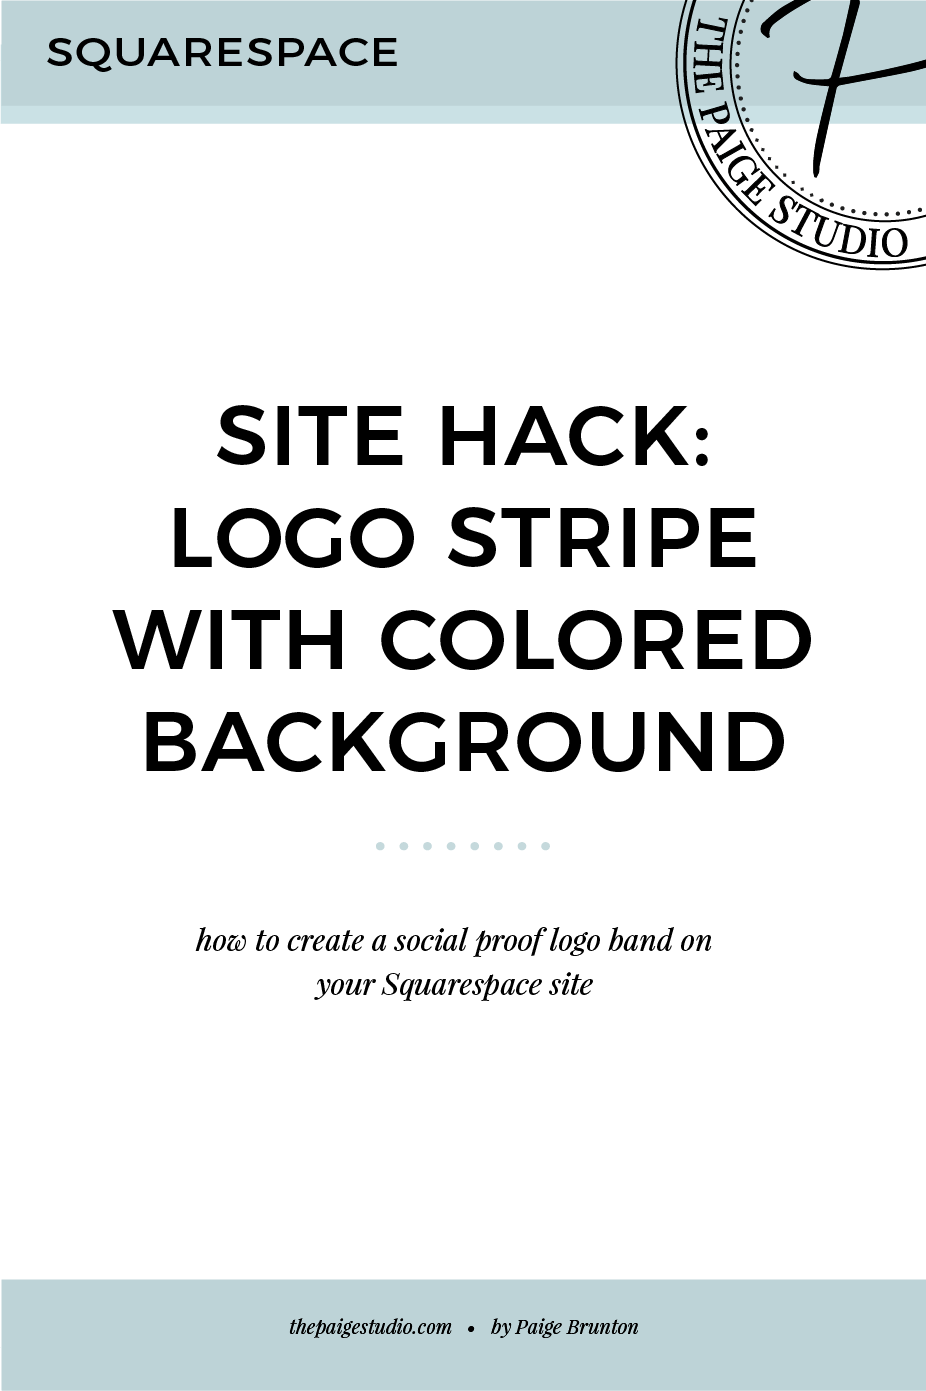 Colored Stripe Logo - Squarespace hack: How to build a colored page section with rotating